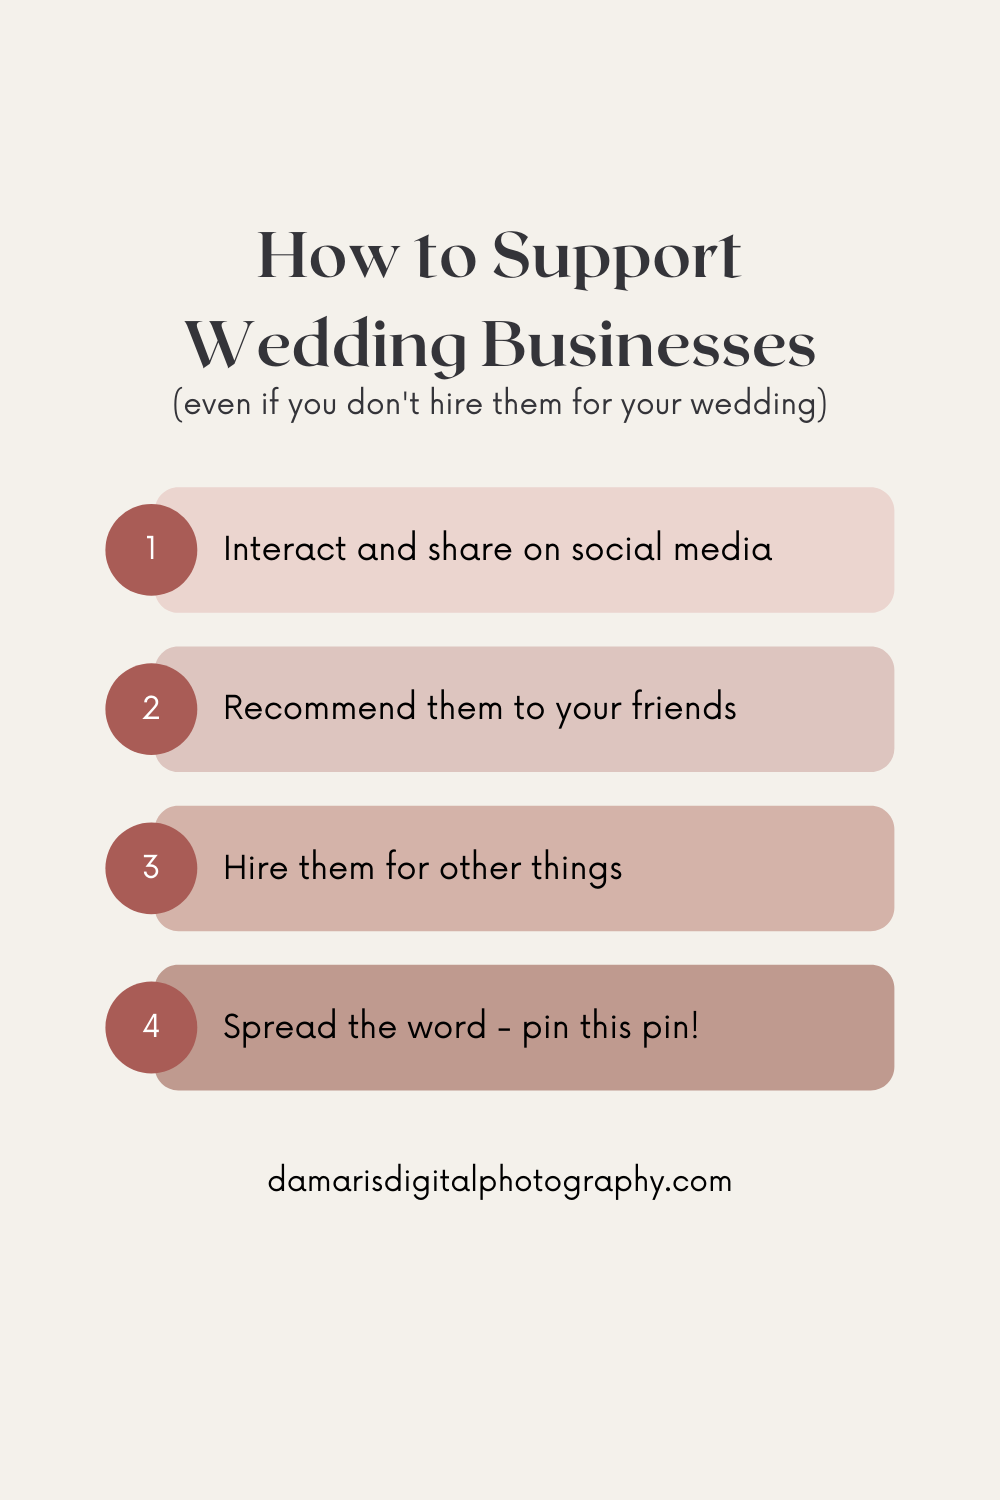 How to Support Wedding Businesses